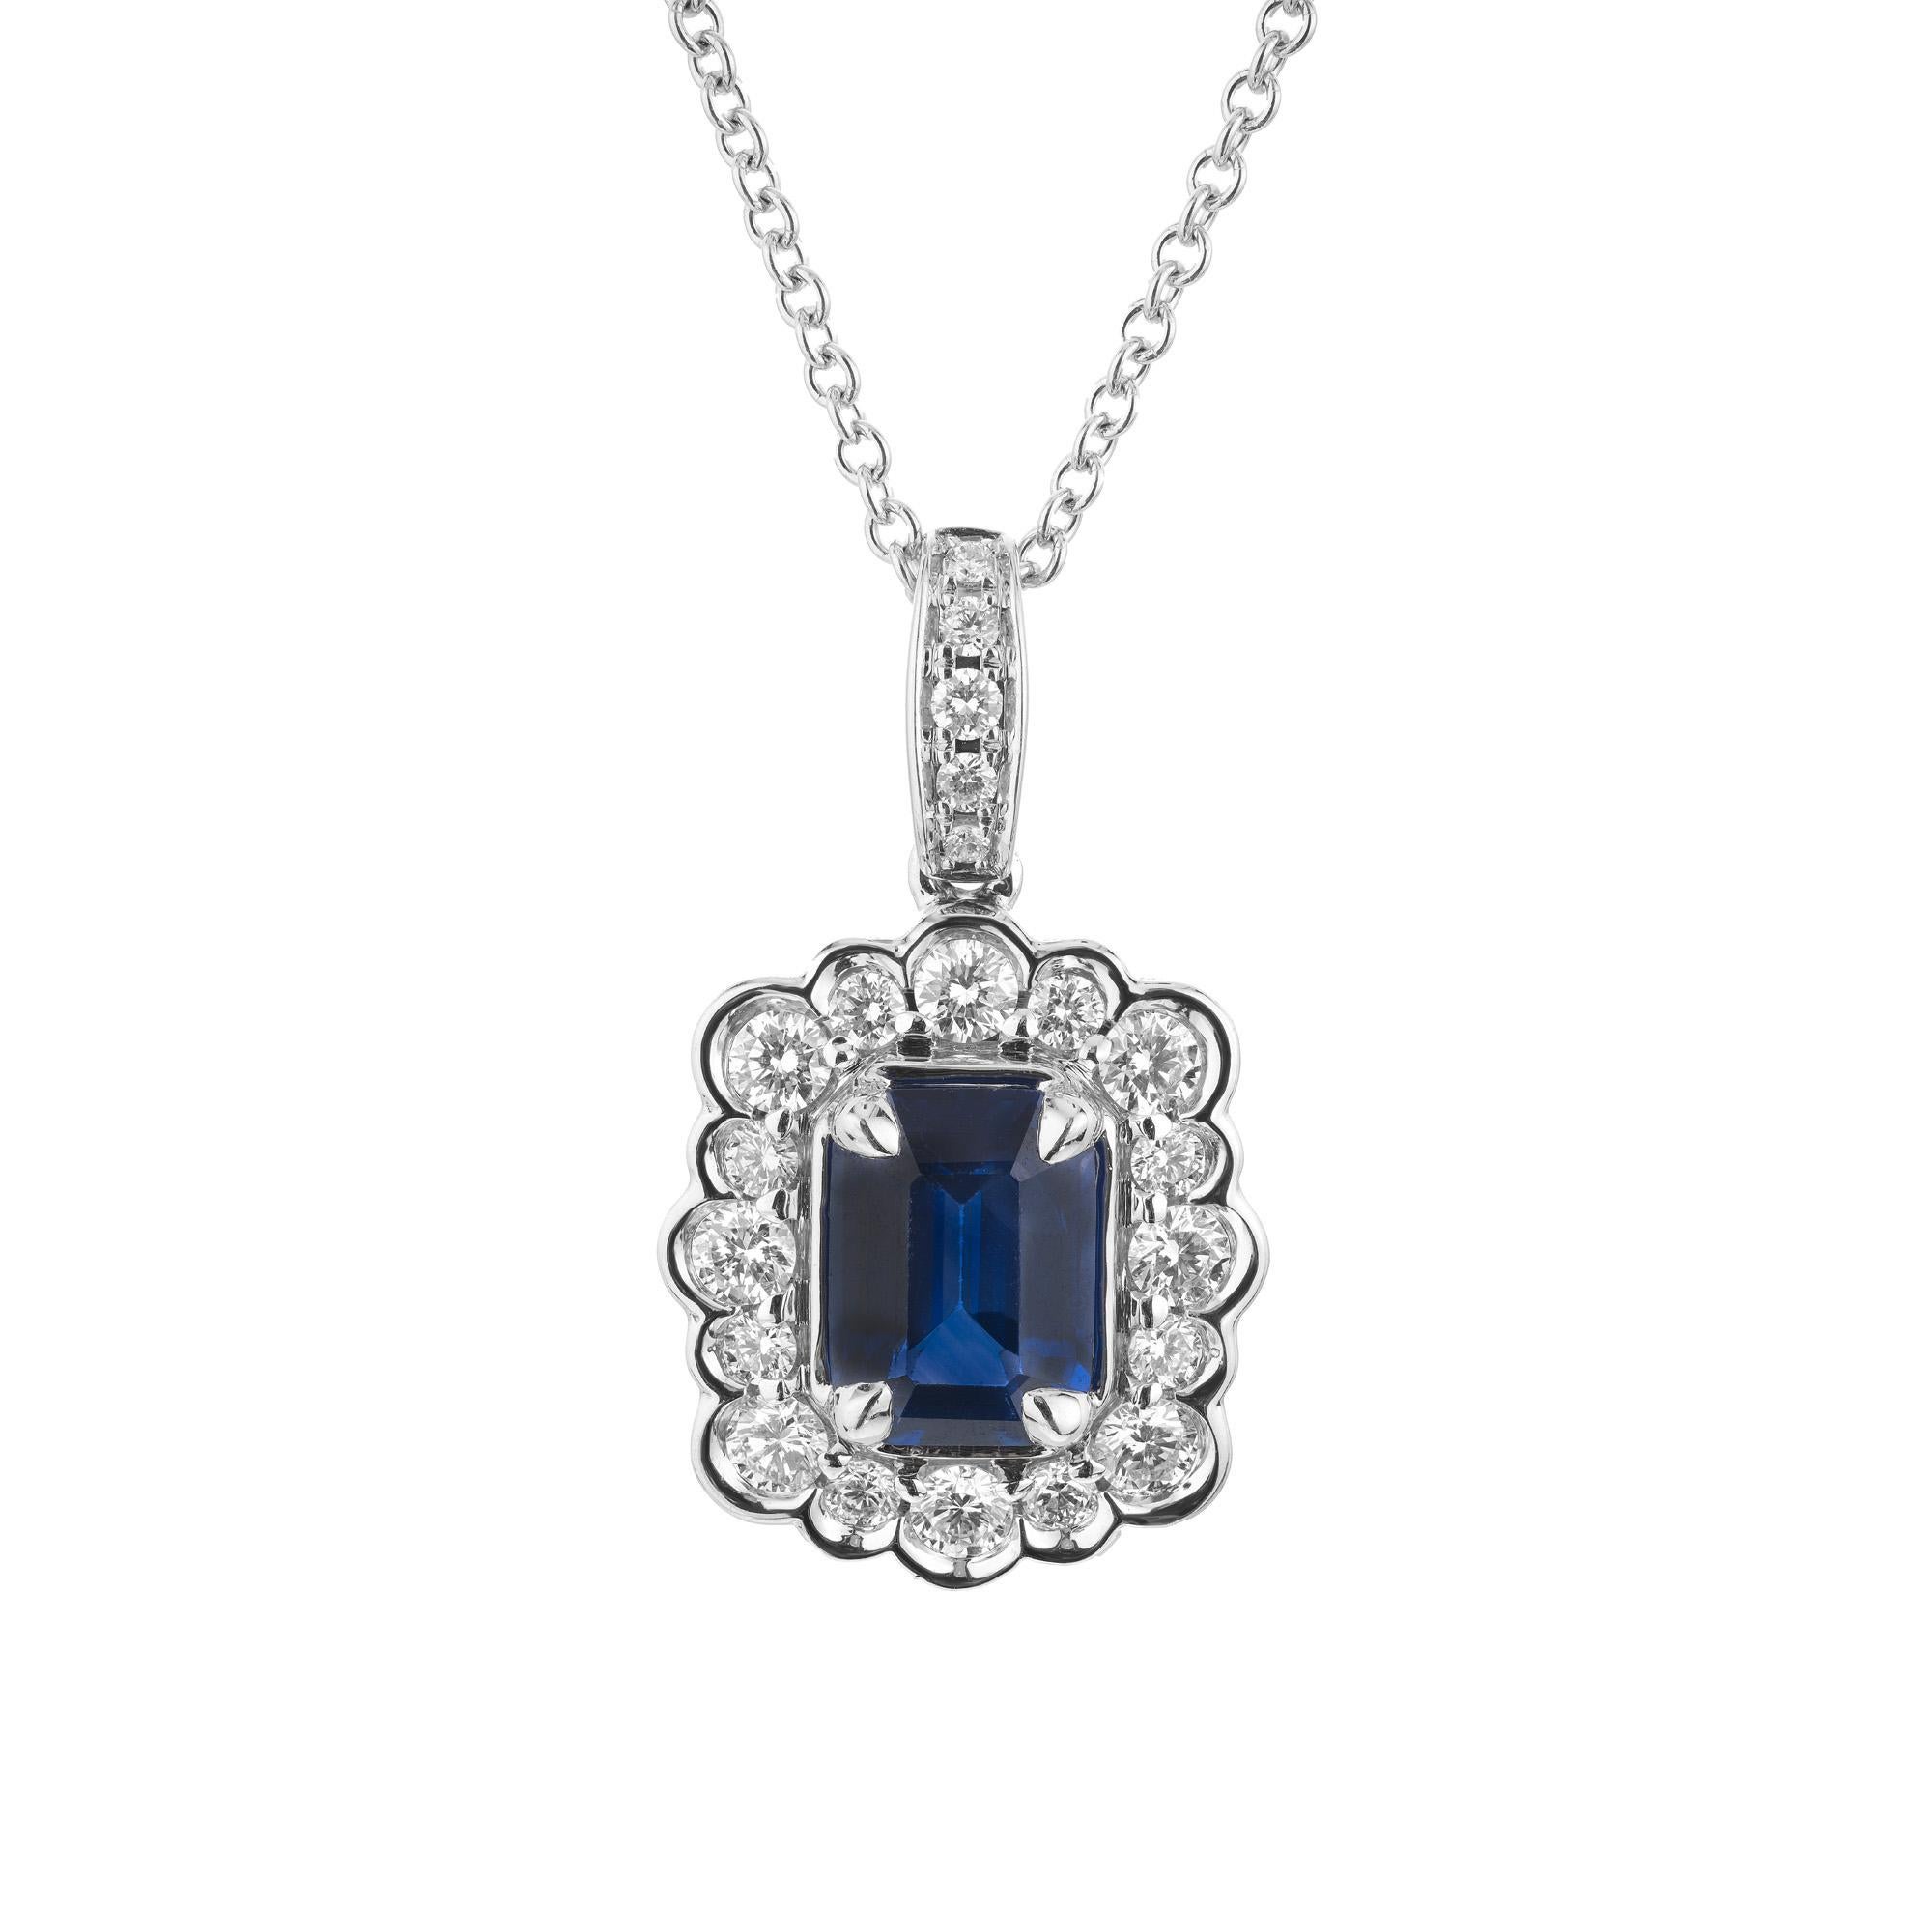 Peter Suchy GIA certified 1.29 Carat Sapphire Diamond Gold Pendant Necklace. This exquisite necklace showcases a stunning deep blue octagonal 1.29ct sapphire center stone, certified by the GIA as simple heat only. The vibrant and rich blue sapphire